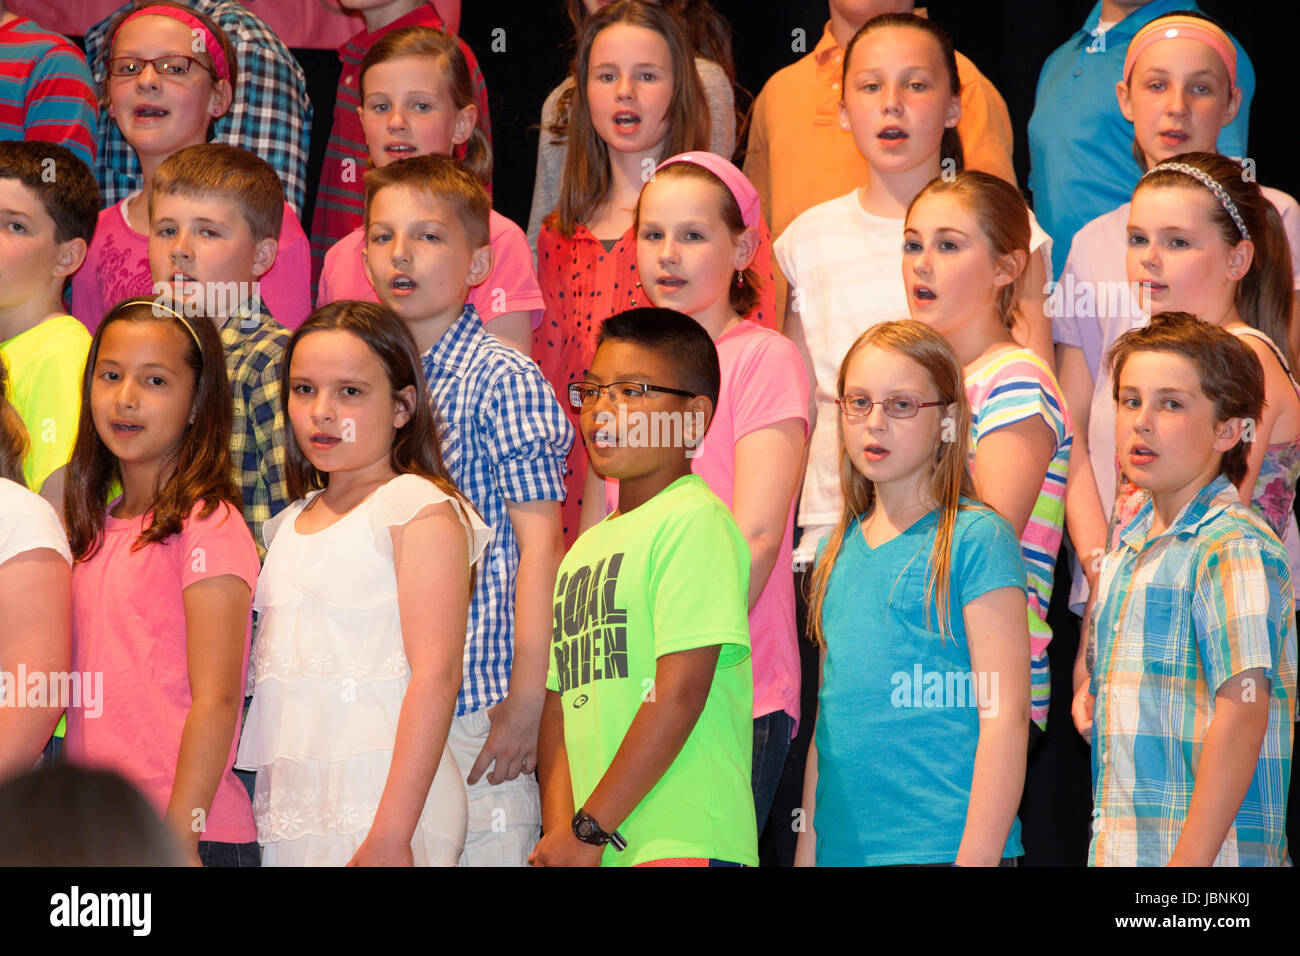 School concert of 5th graders singing in a choir. St Paul Minnesota MN USA Stock Photo